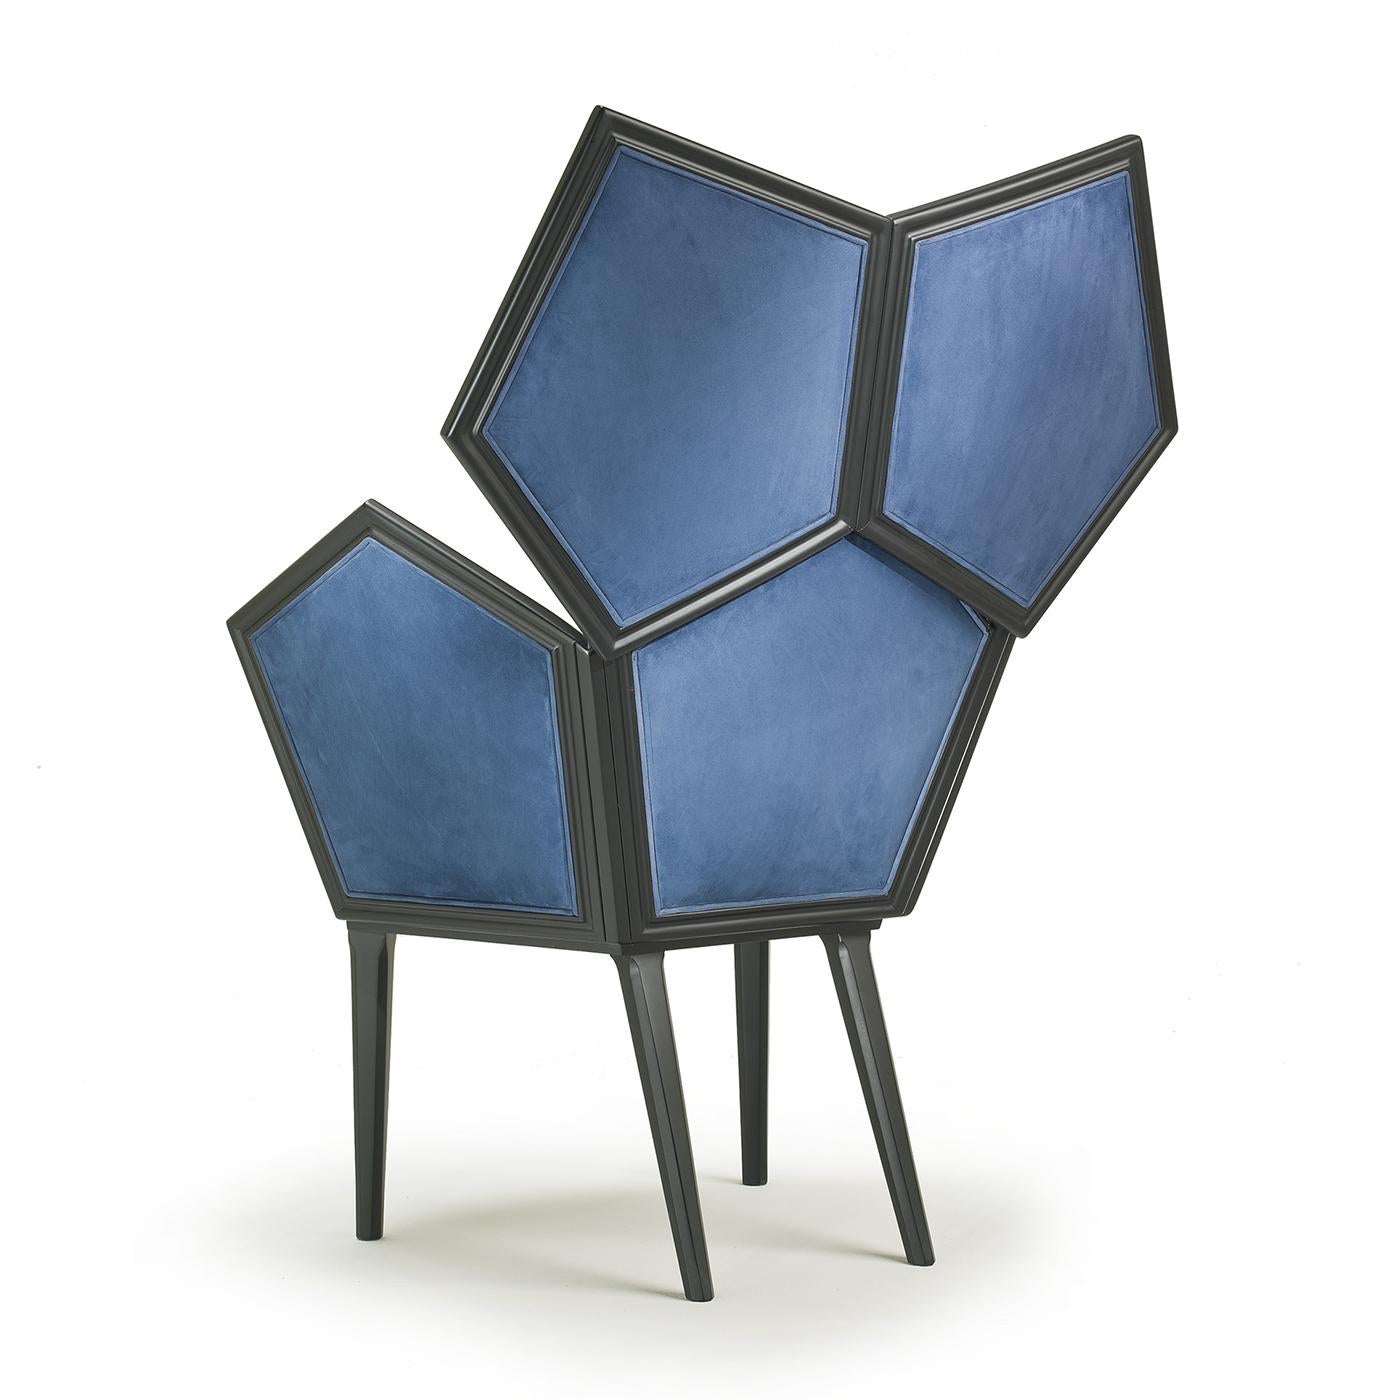 Creating the shape of a stylized flower made up of modular pentagonal elements, the unique design of this armchair will make a statement in a modern home, where it will be a superb object of functional decor in any room in the house. The seat (47 cm